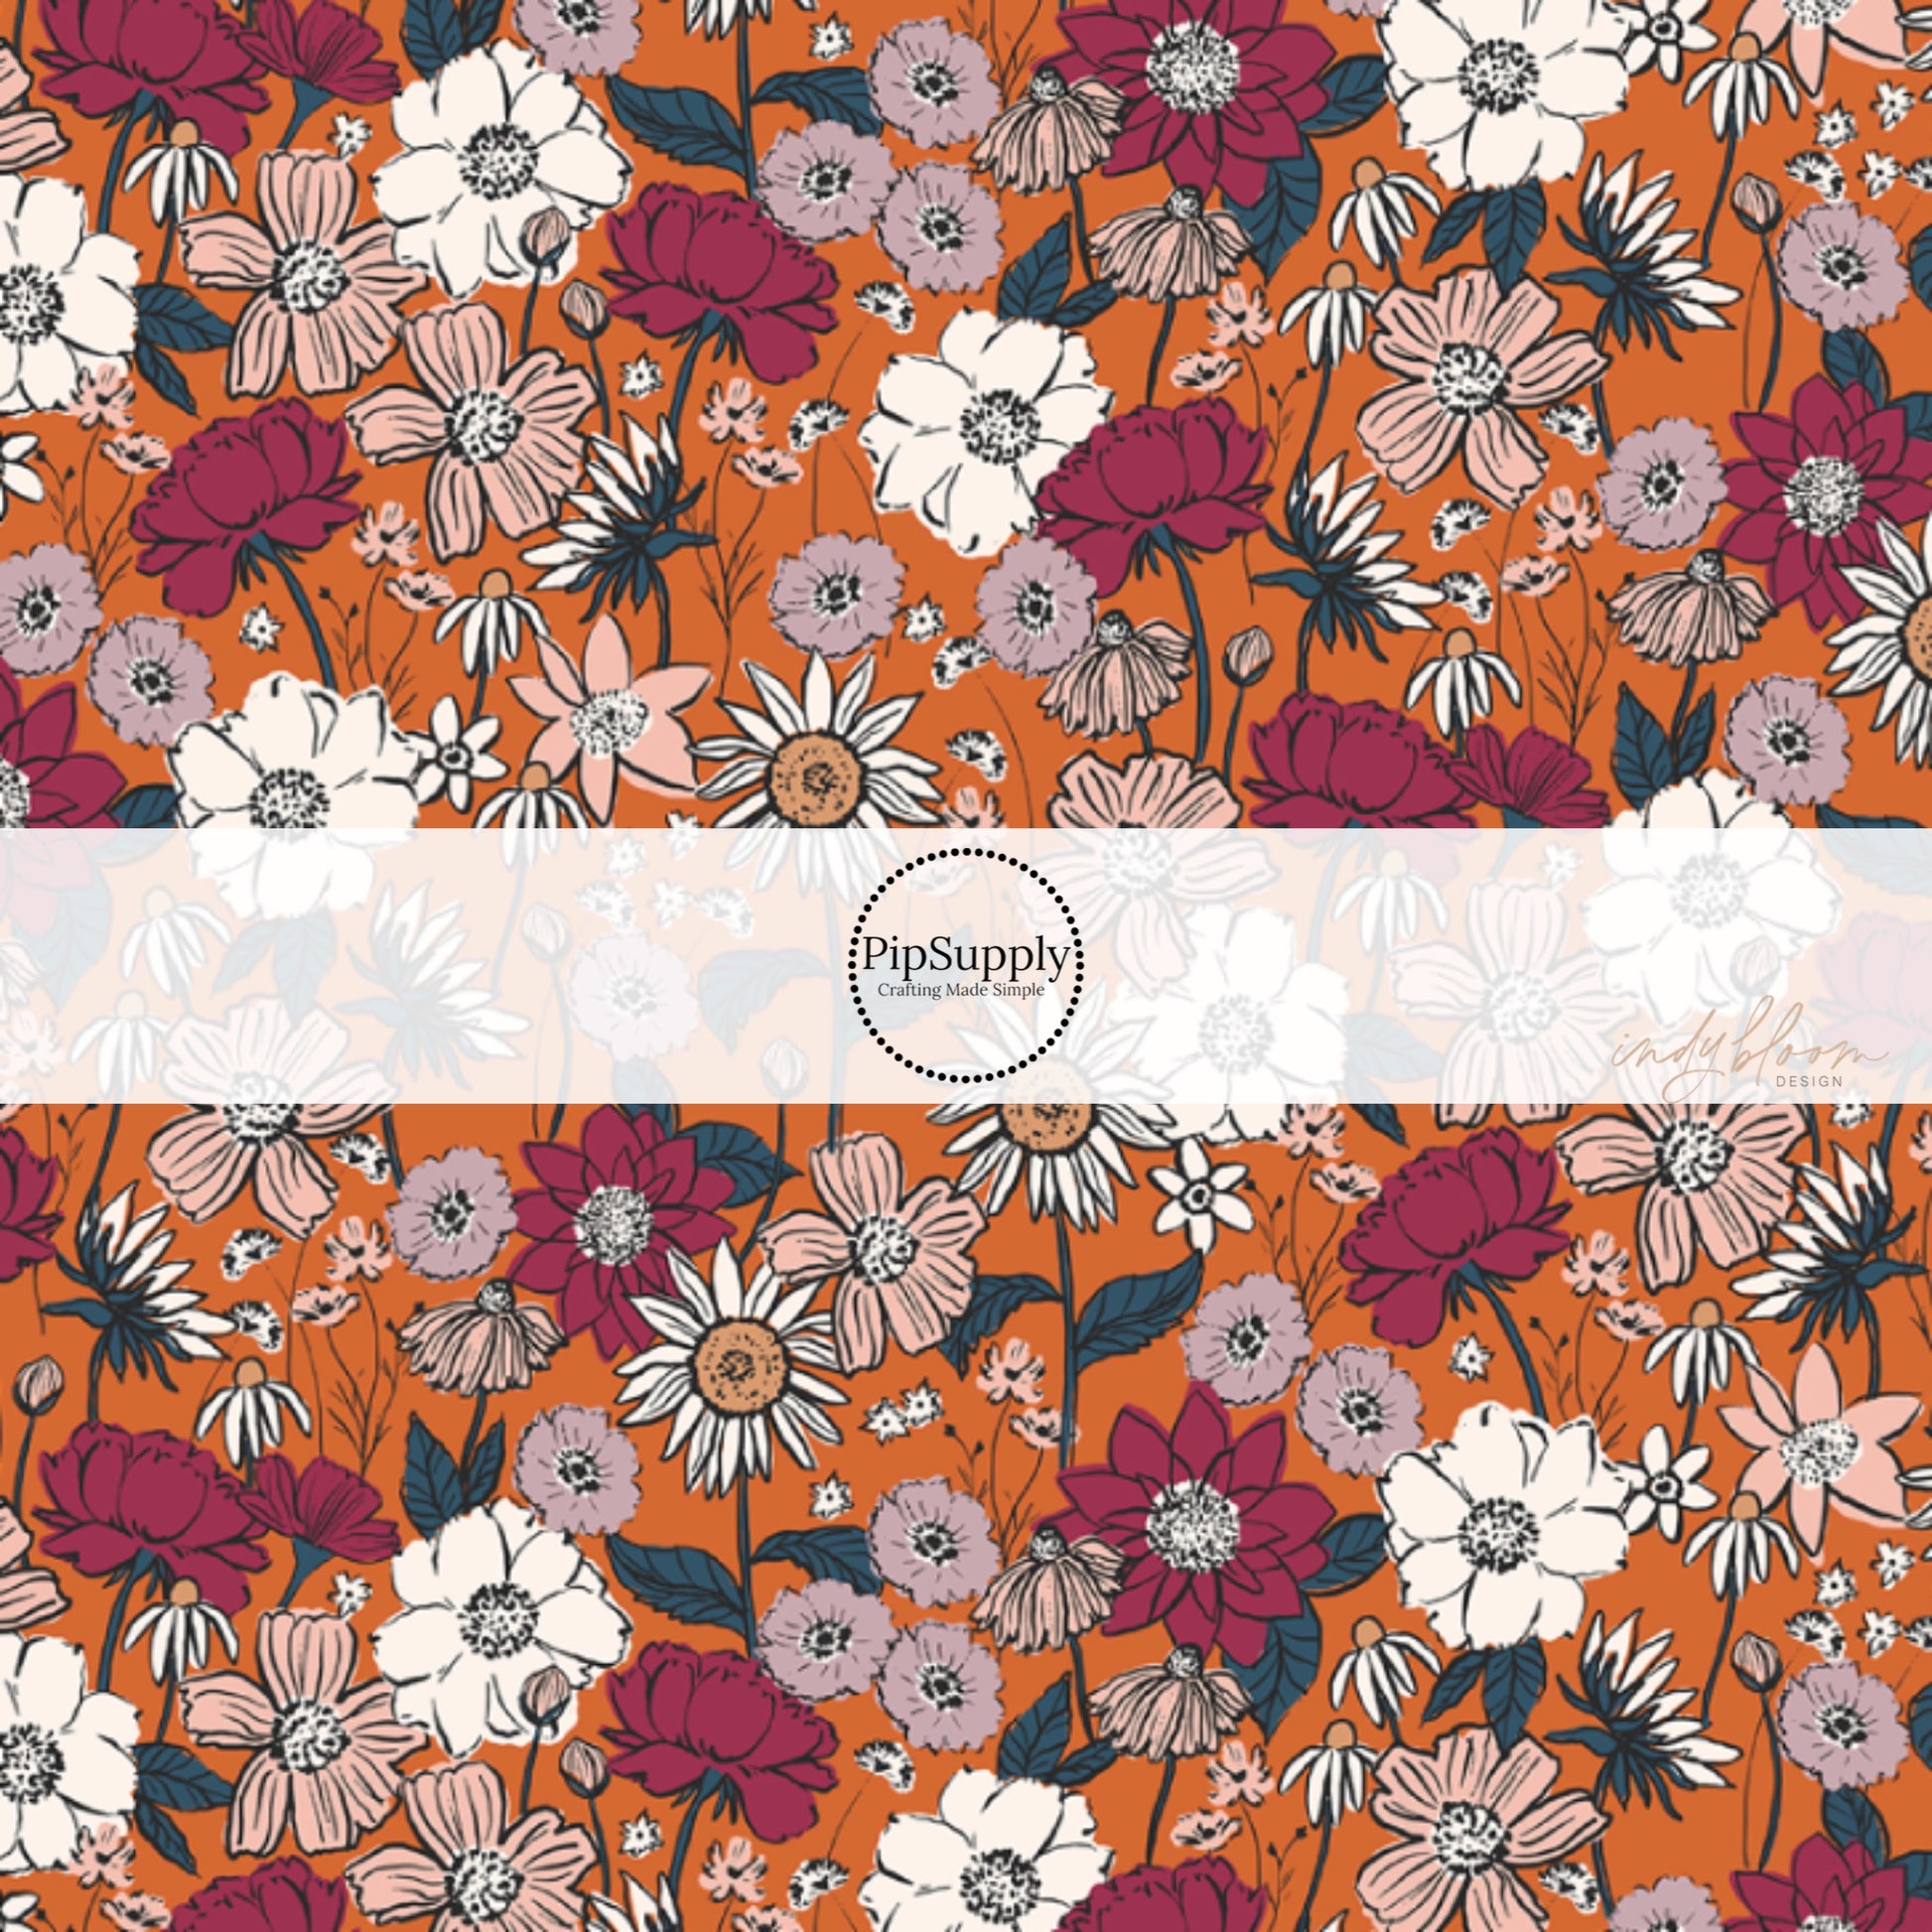 These fall floral themed fabric by the yard features autumn flowers on orange. This fun floral themed fabric can be used for all your sewing and crafting needs! 